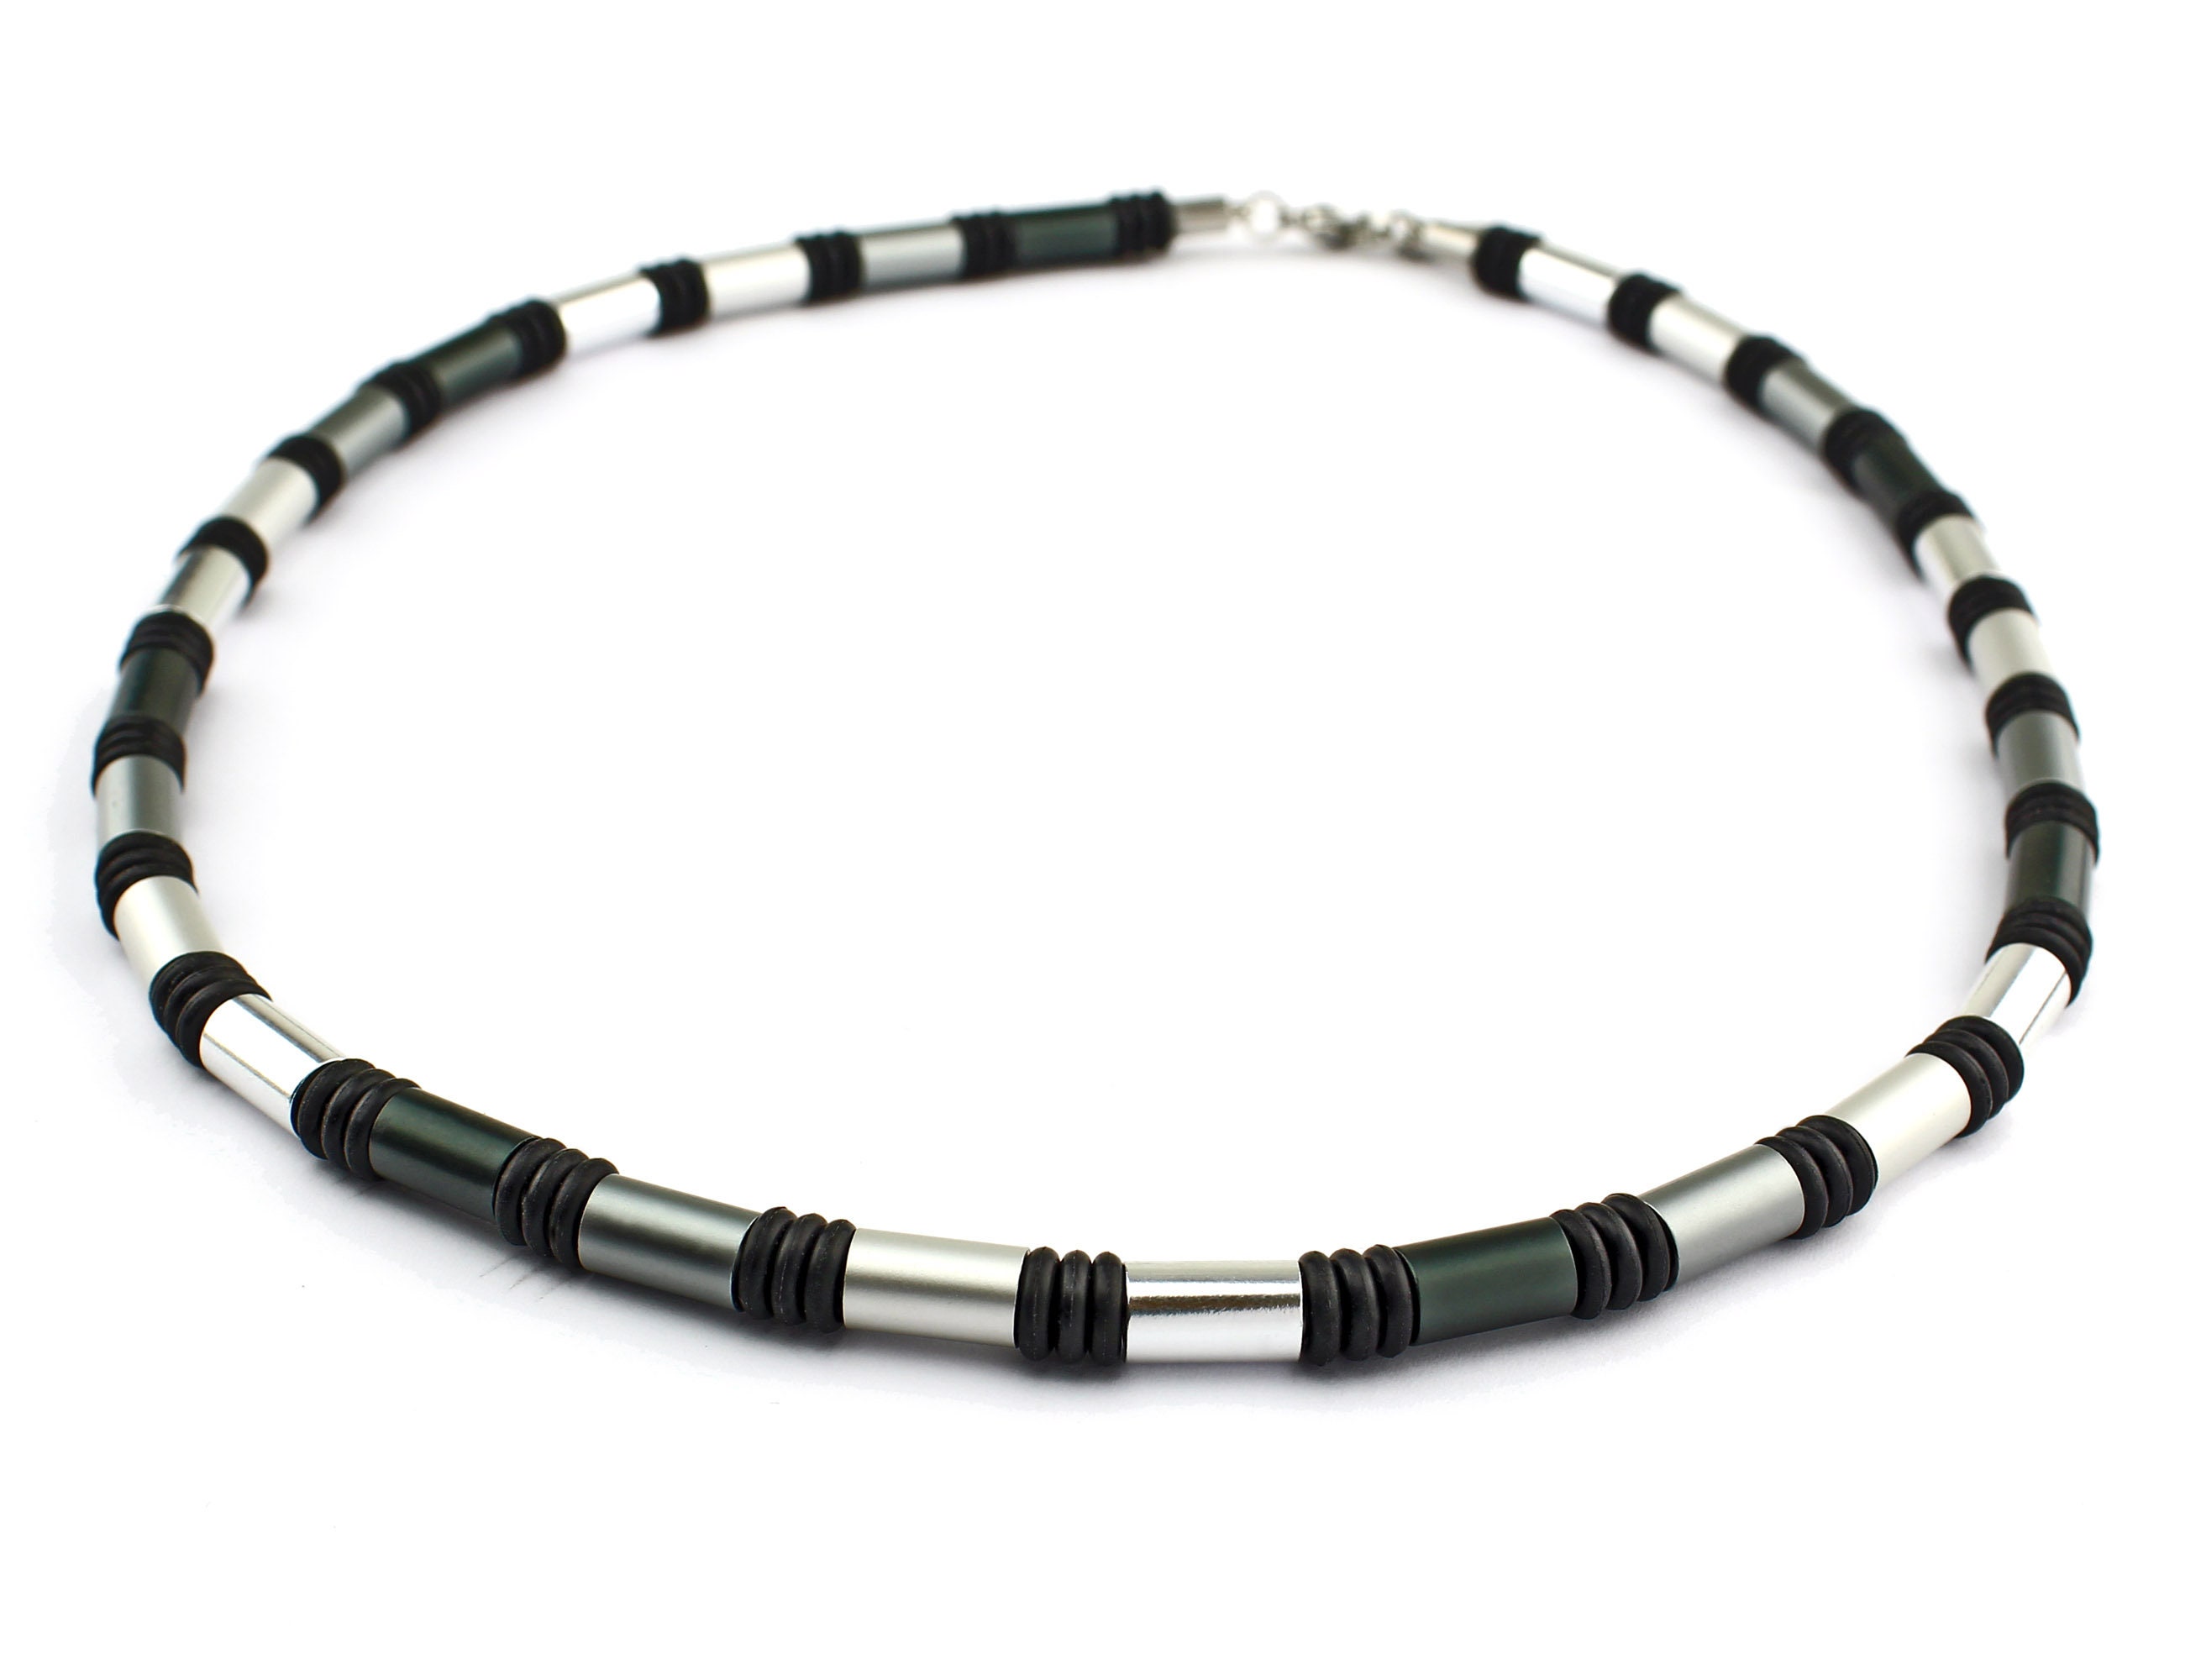 Men's Surfer Turquoise and Silver Bead Necklace Choker Black Rubber Choker 